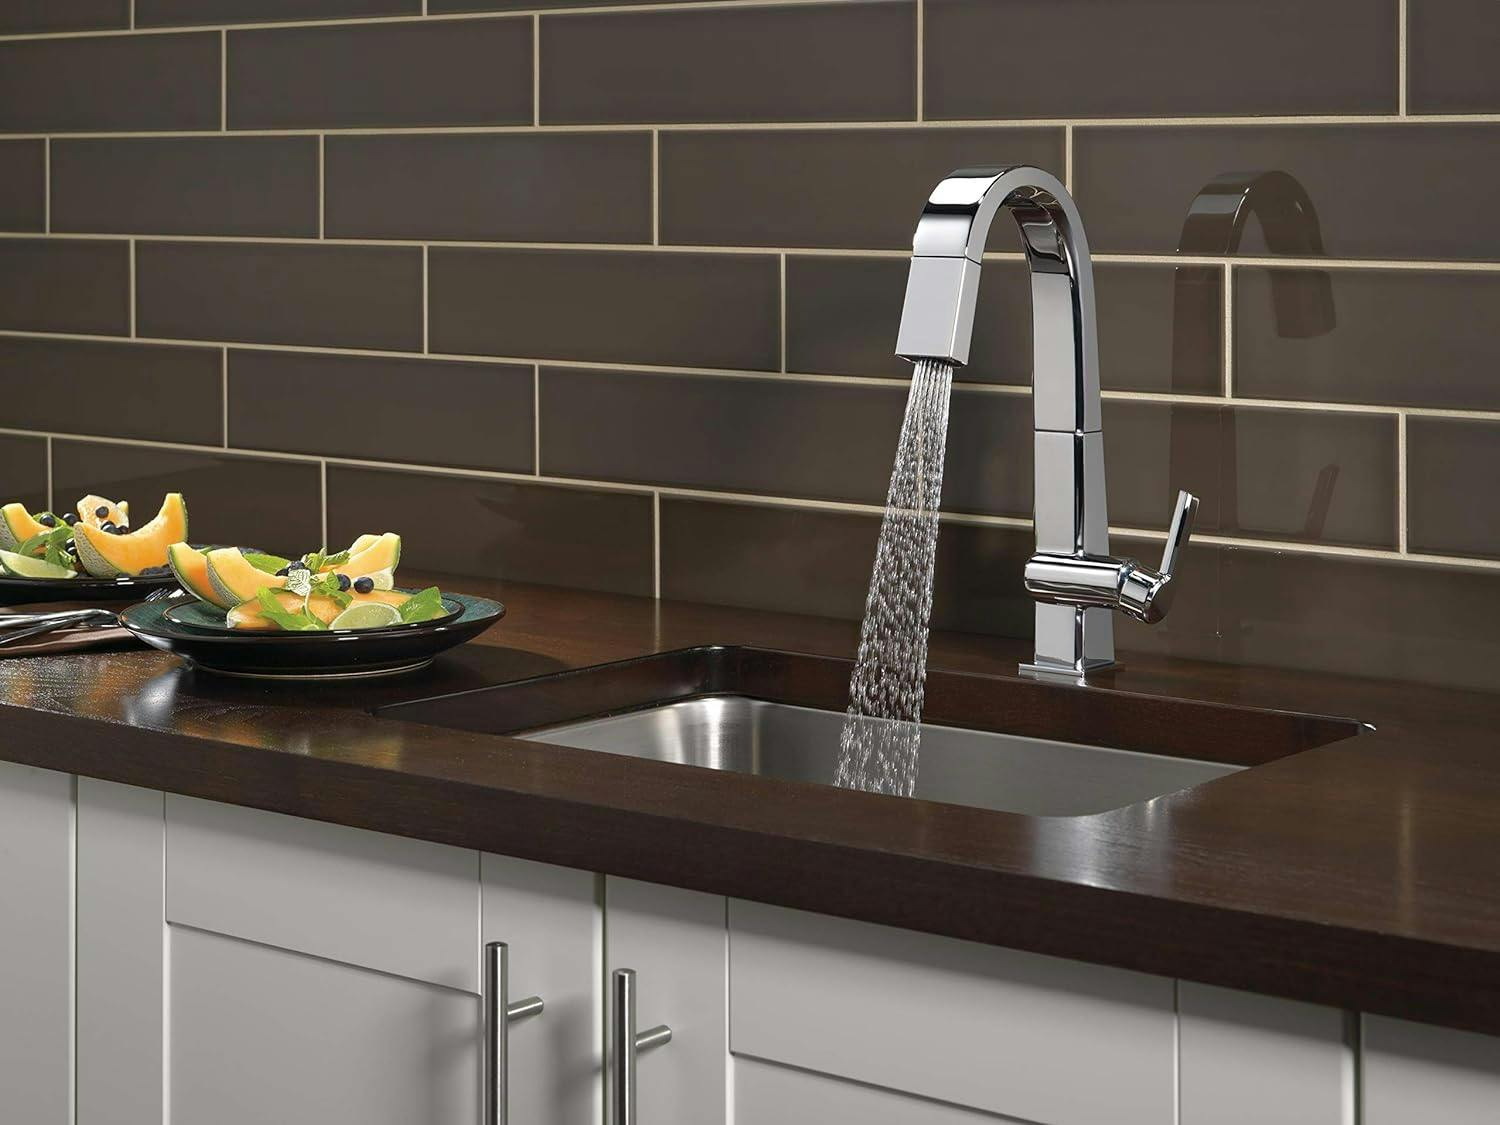 Modern Chrome Pull-Down Kitchen Faucet with 360° Swivel